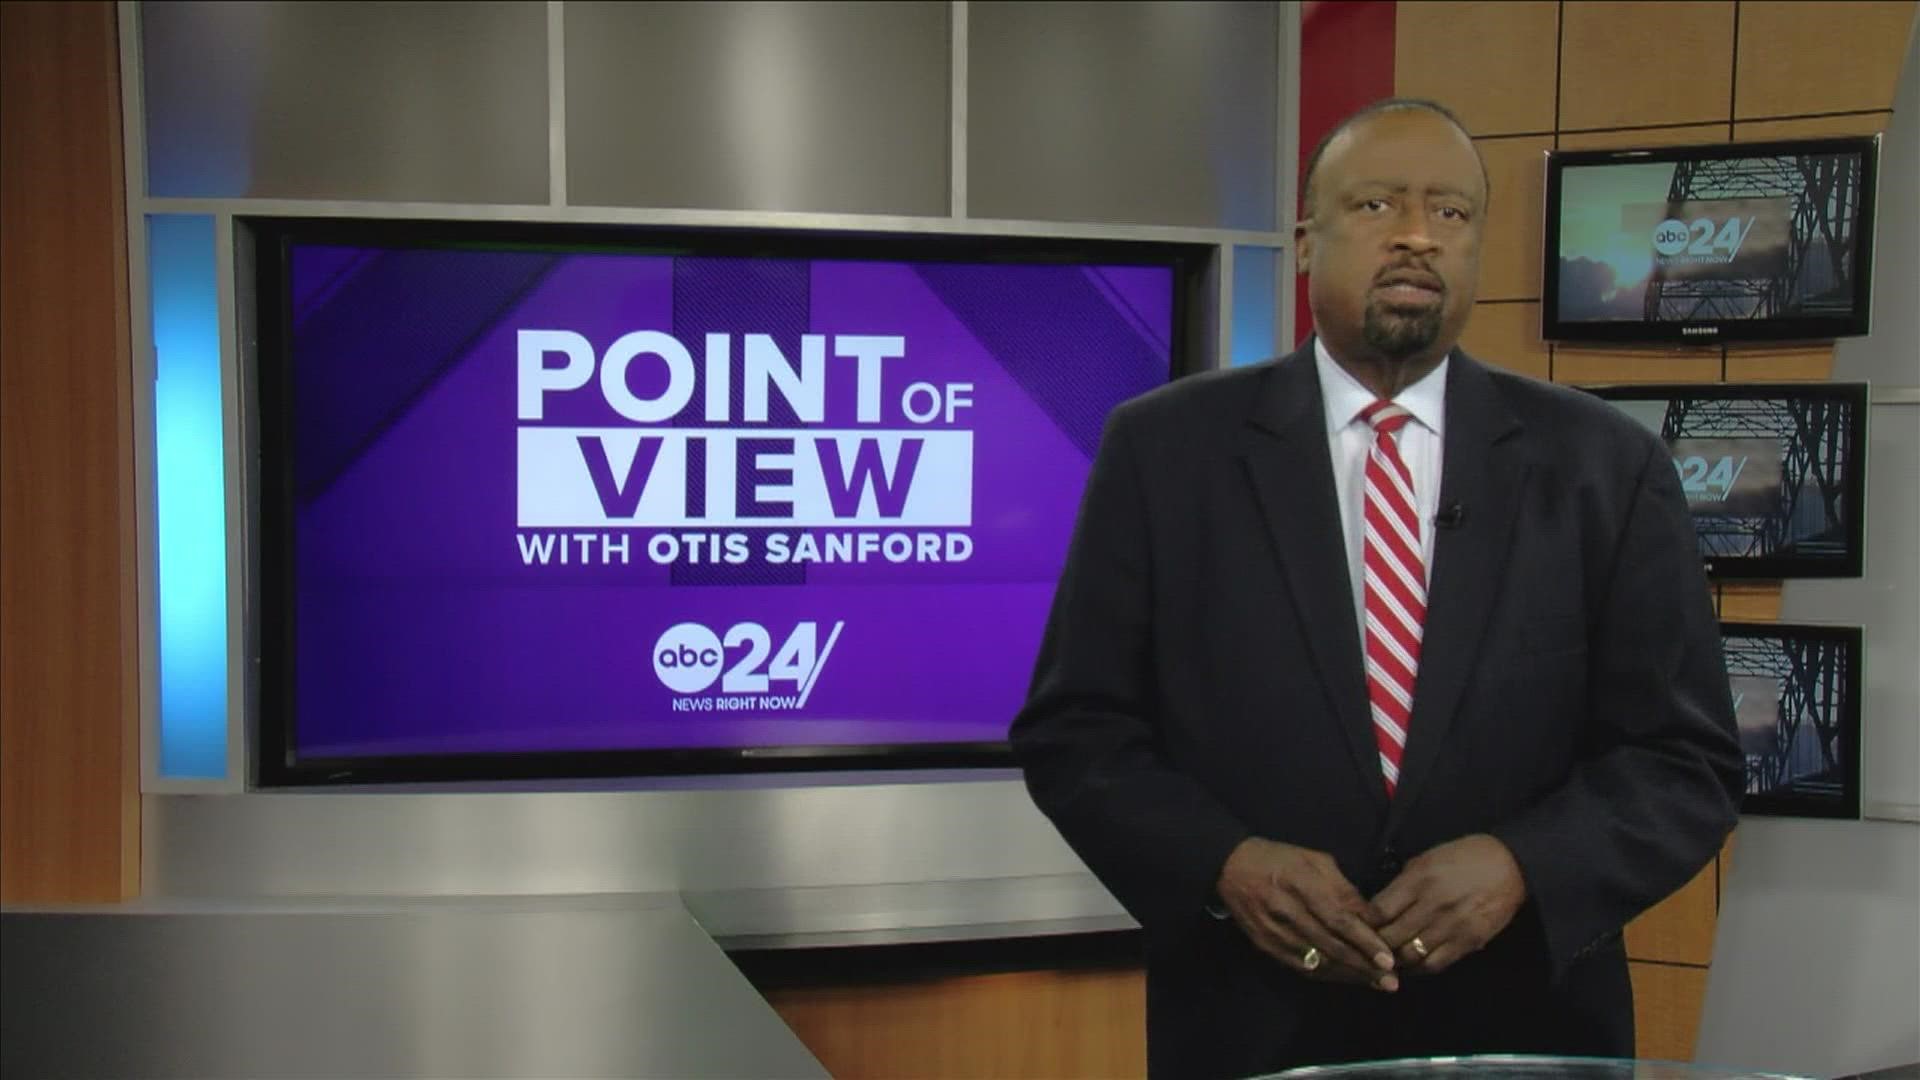 ABC 24 political analyst and commentator Otis Sanford shared his point of view on the Tennessee Supreme Court Justice recusing herself from school vouchers case.